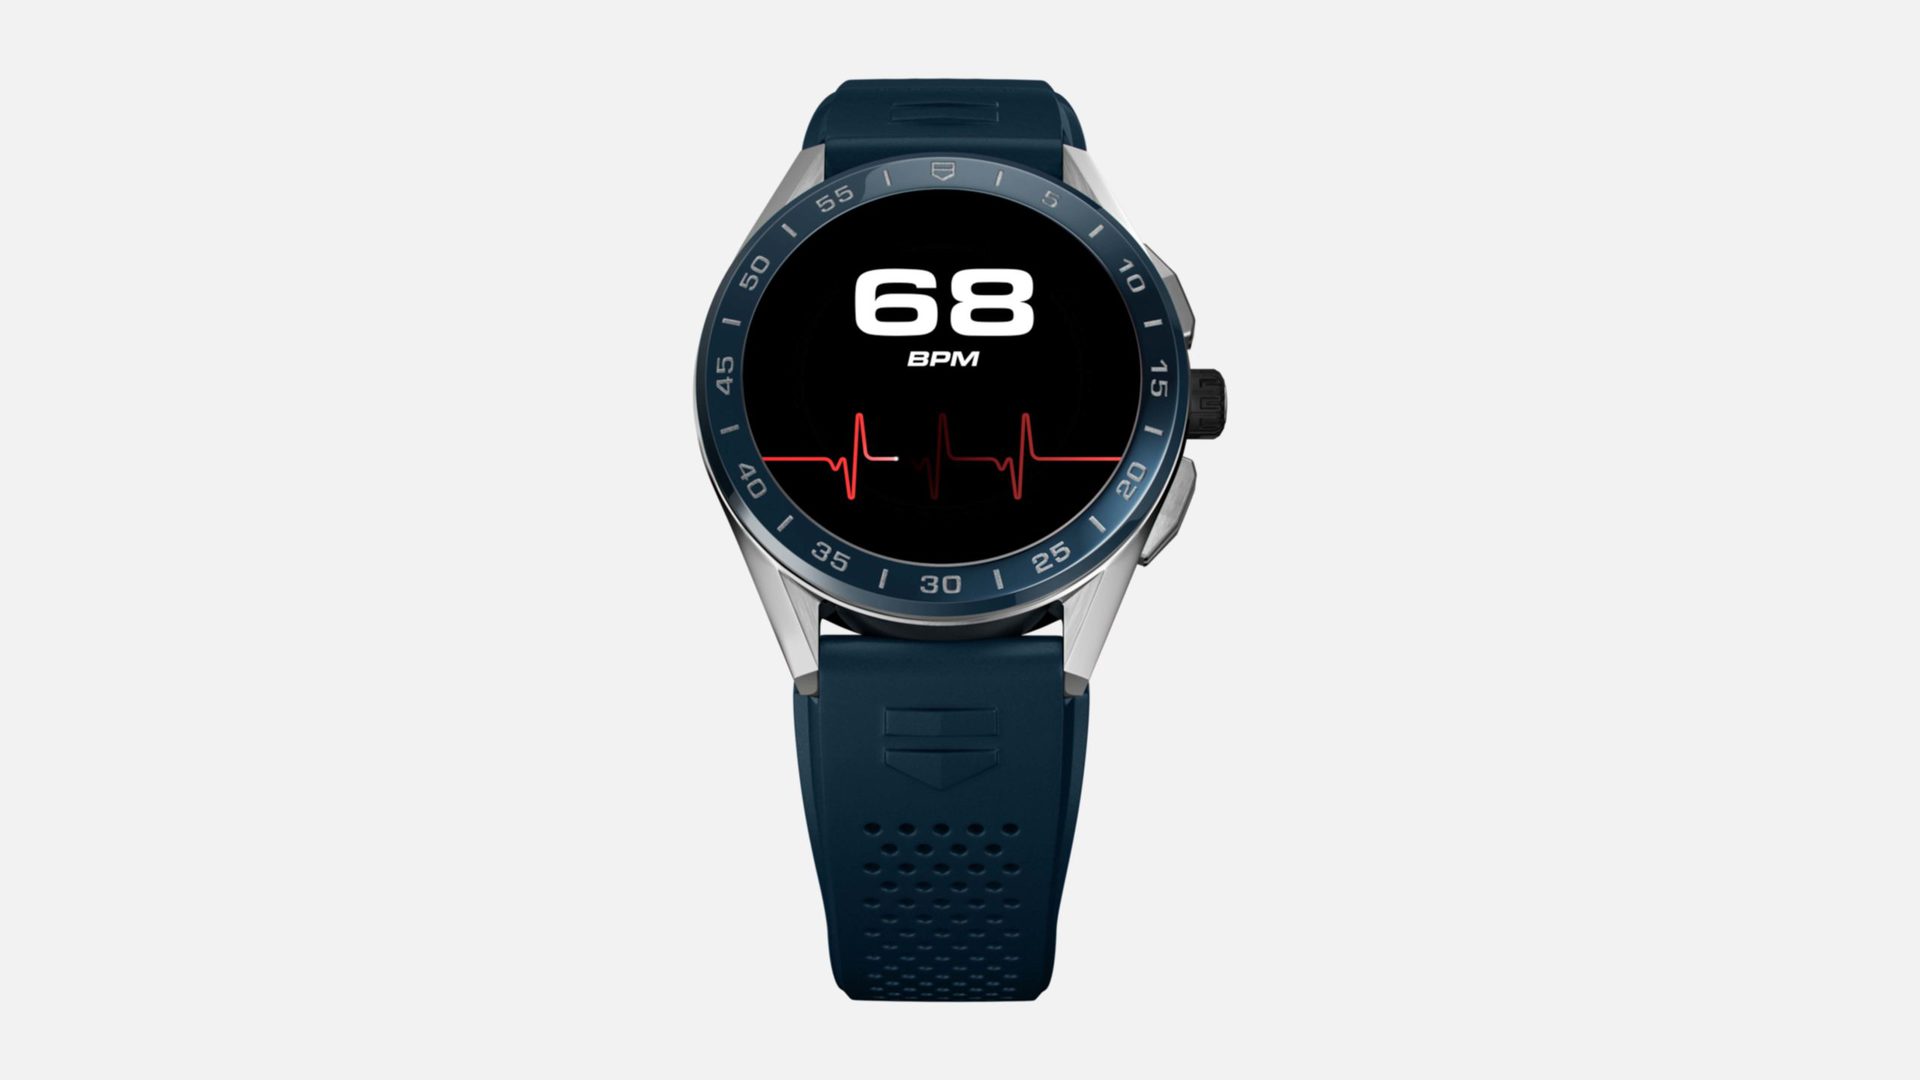 Product image of a Tag Heuer Connected 2020 smartwatch with a steel case and blue rubber strap.